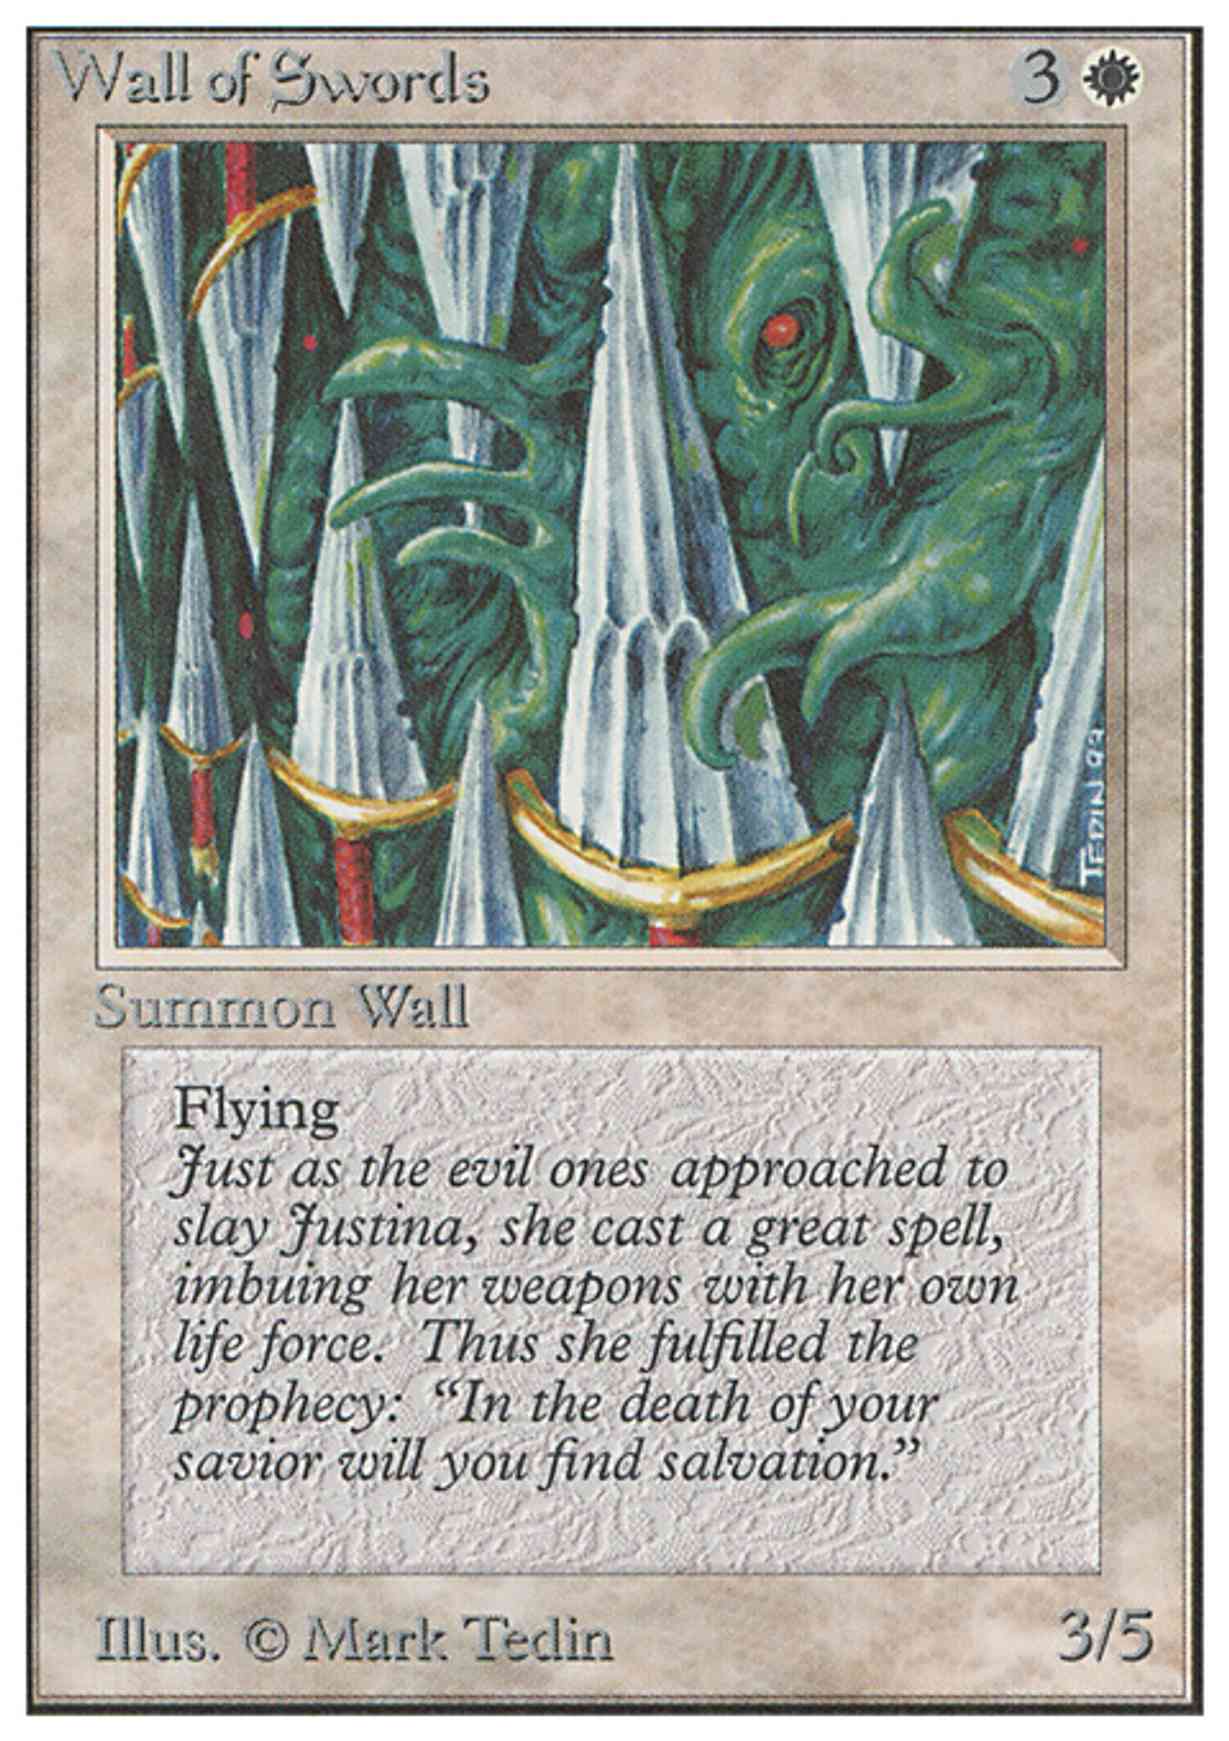 Wall of Swords magic card front